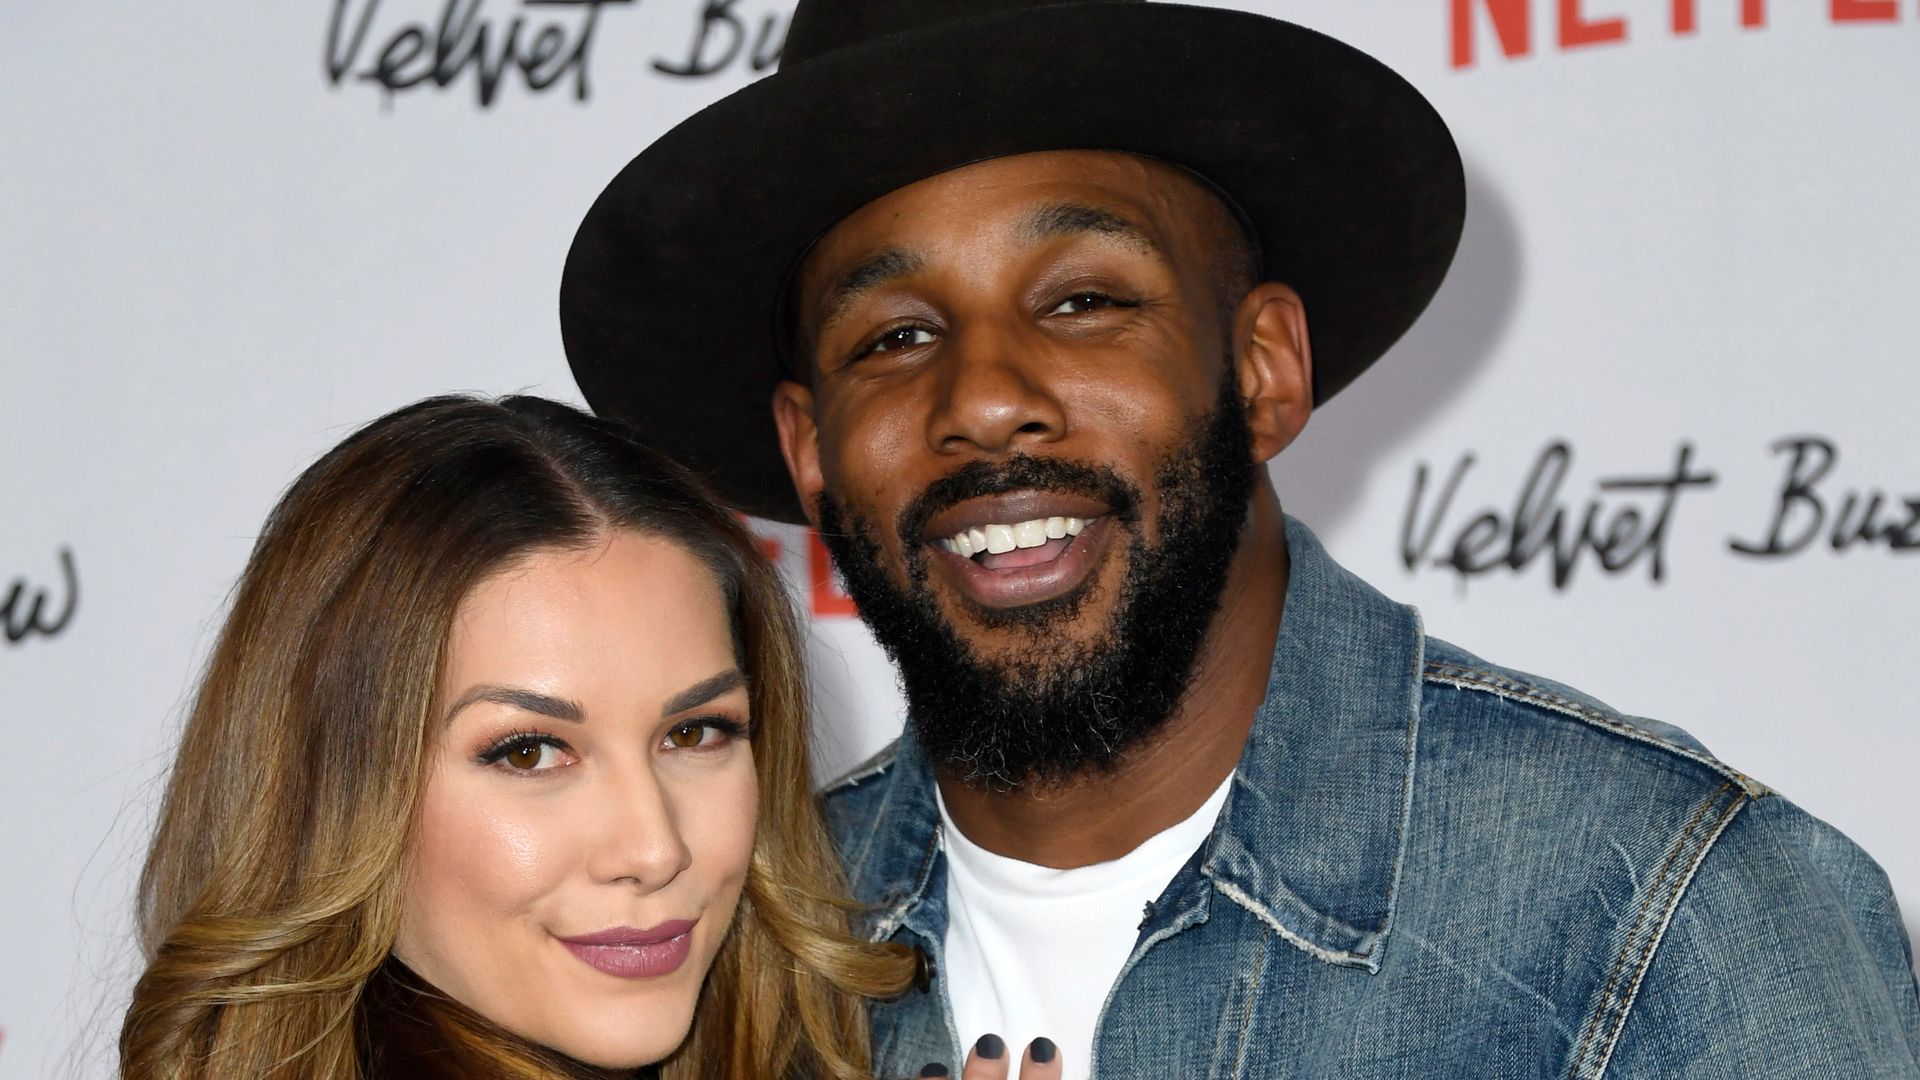 Allison Holker and Stephen tWitch Boss in Los Angeles in 2019